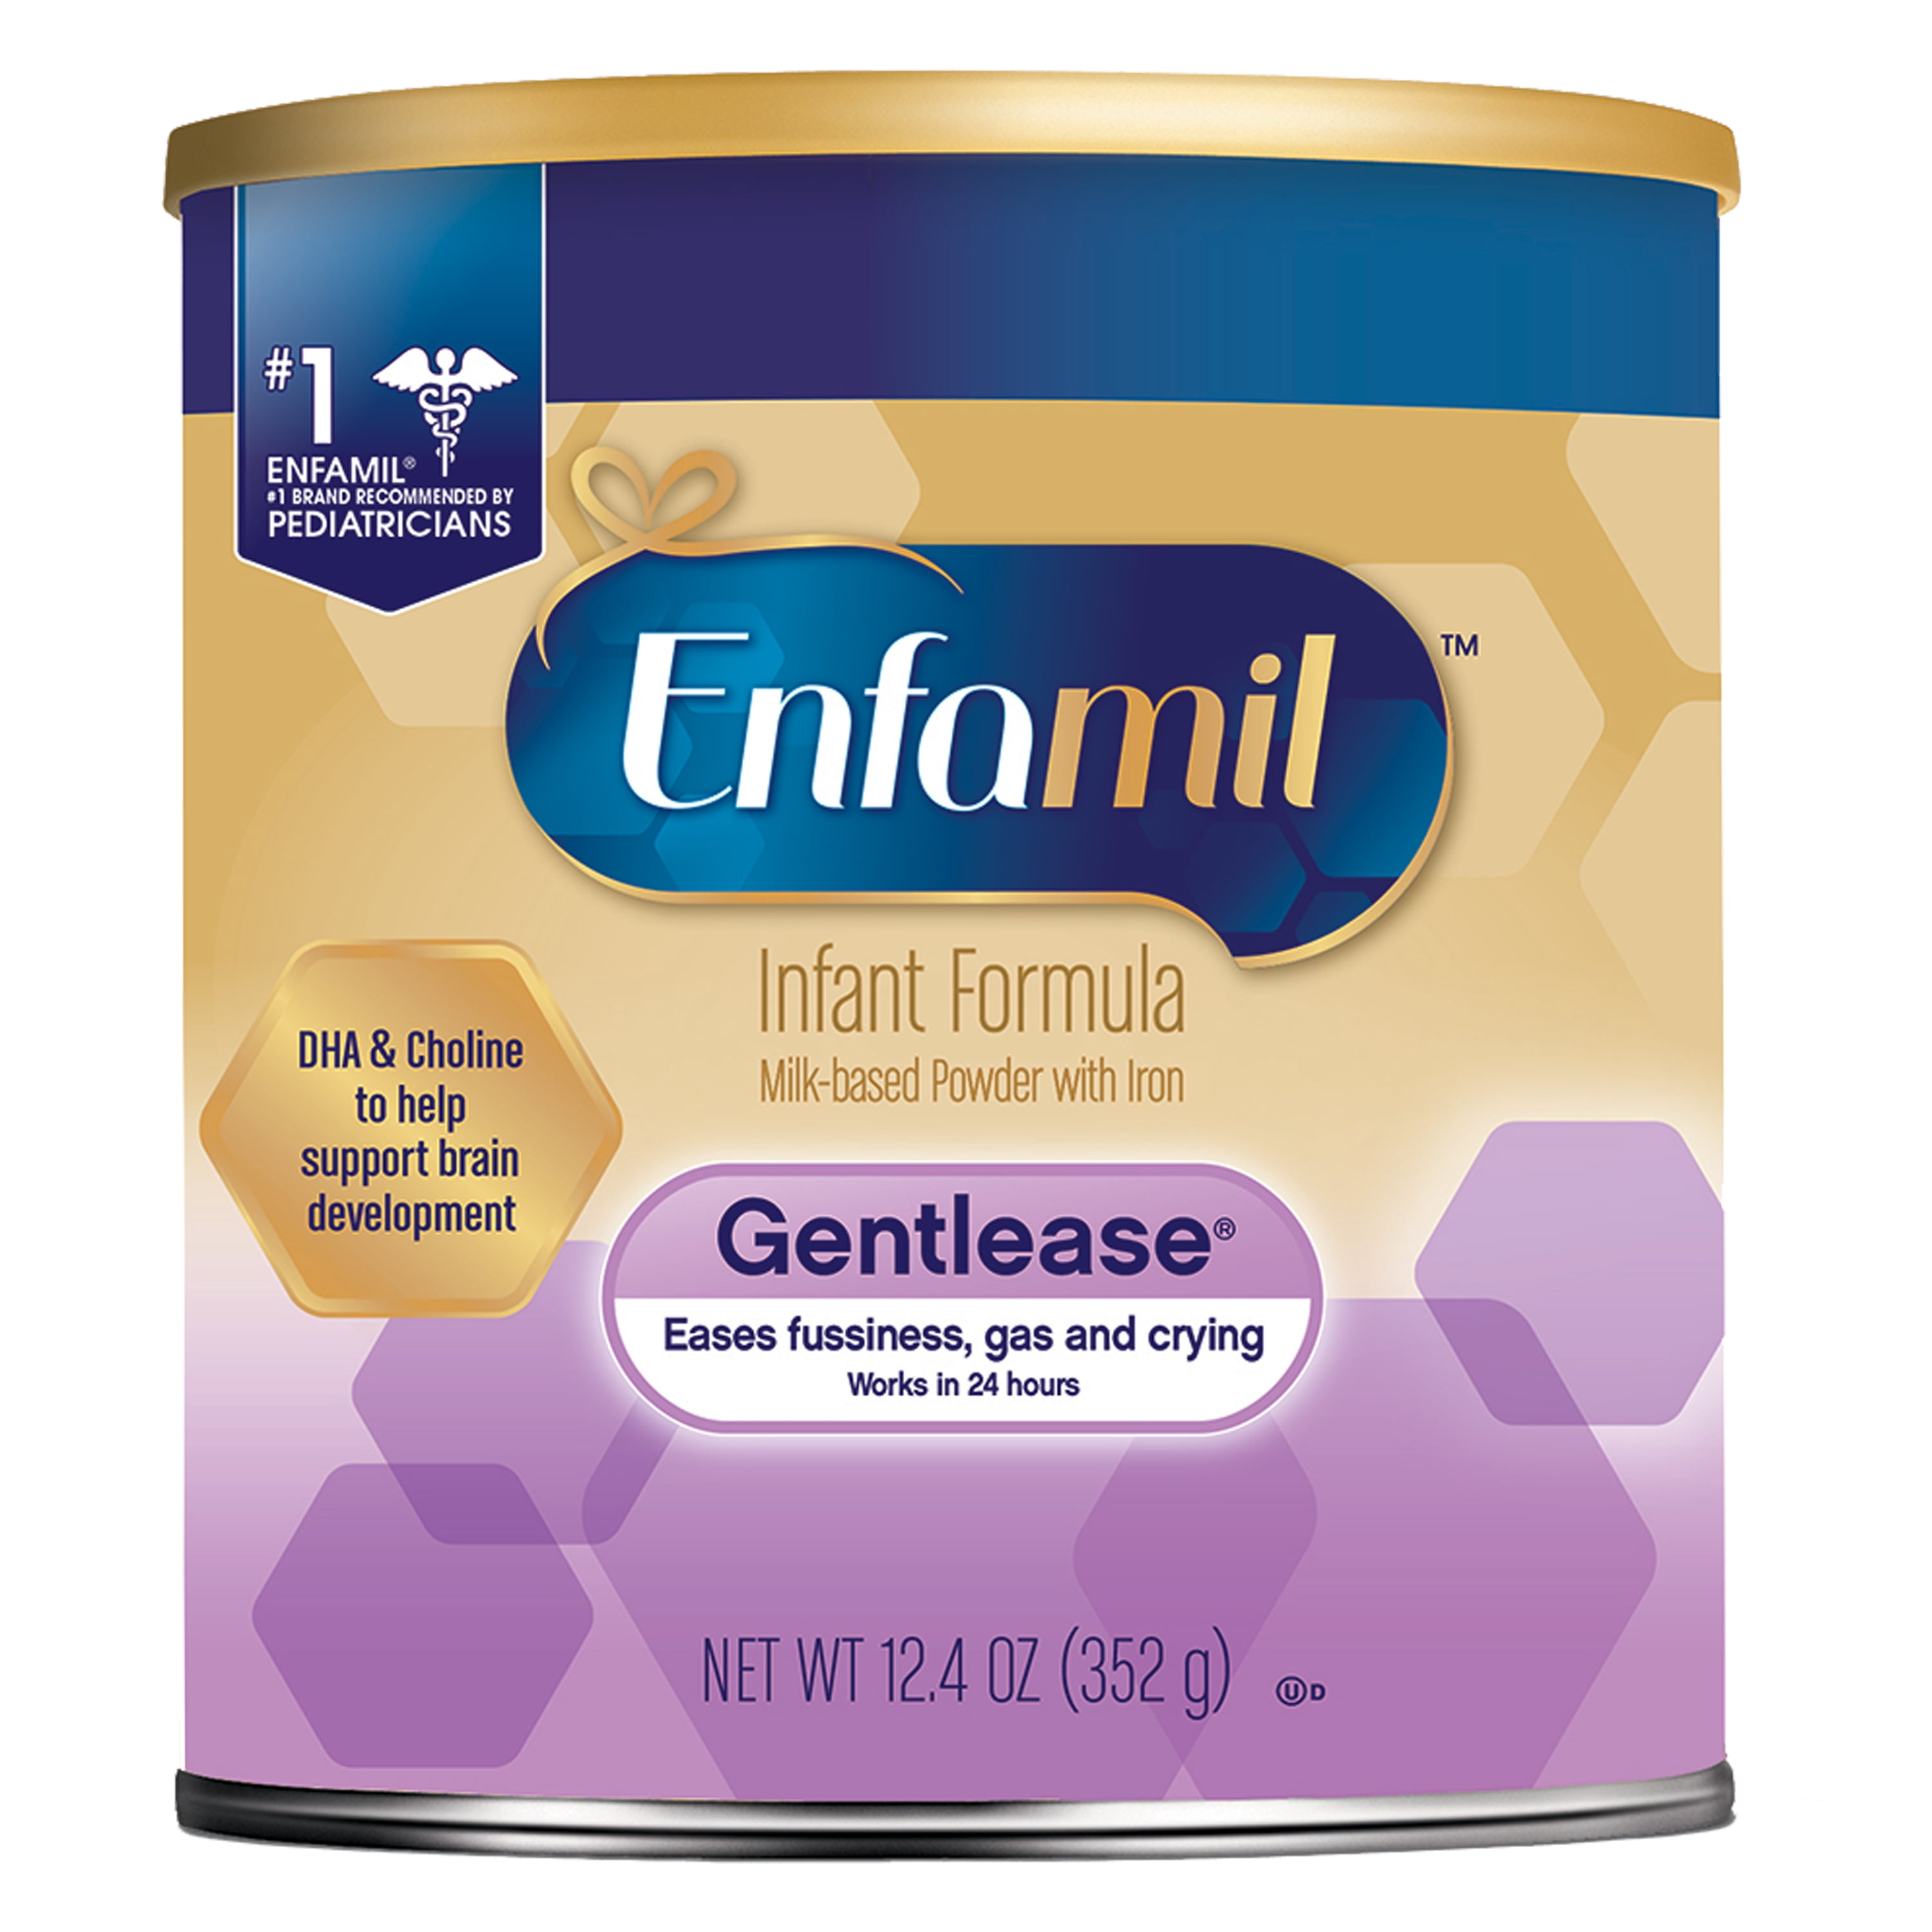 Enfamil Gentlease Infant Formula For Fussiness Gas And Crying 